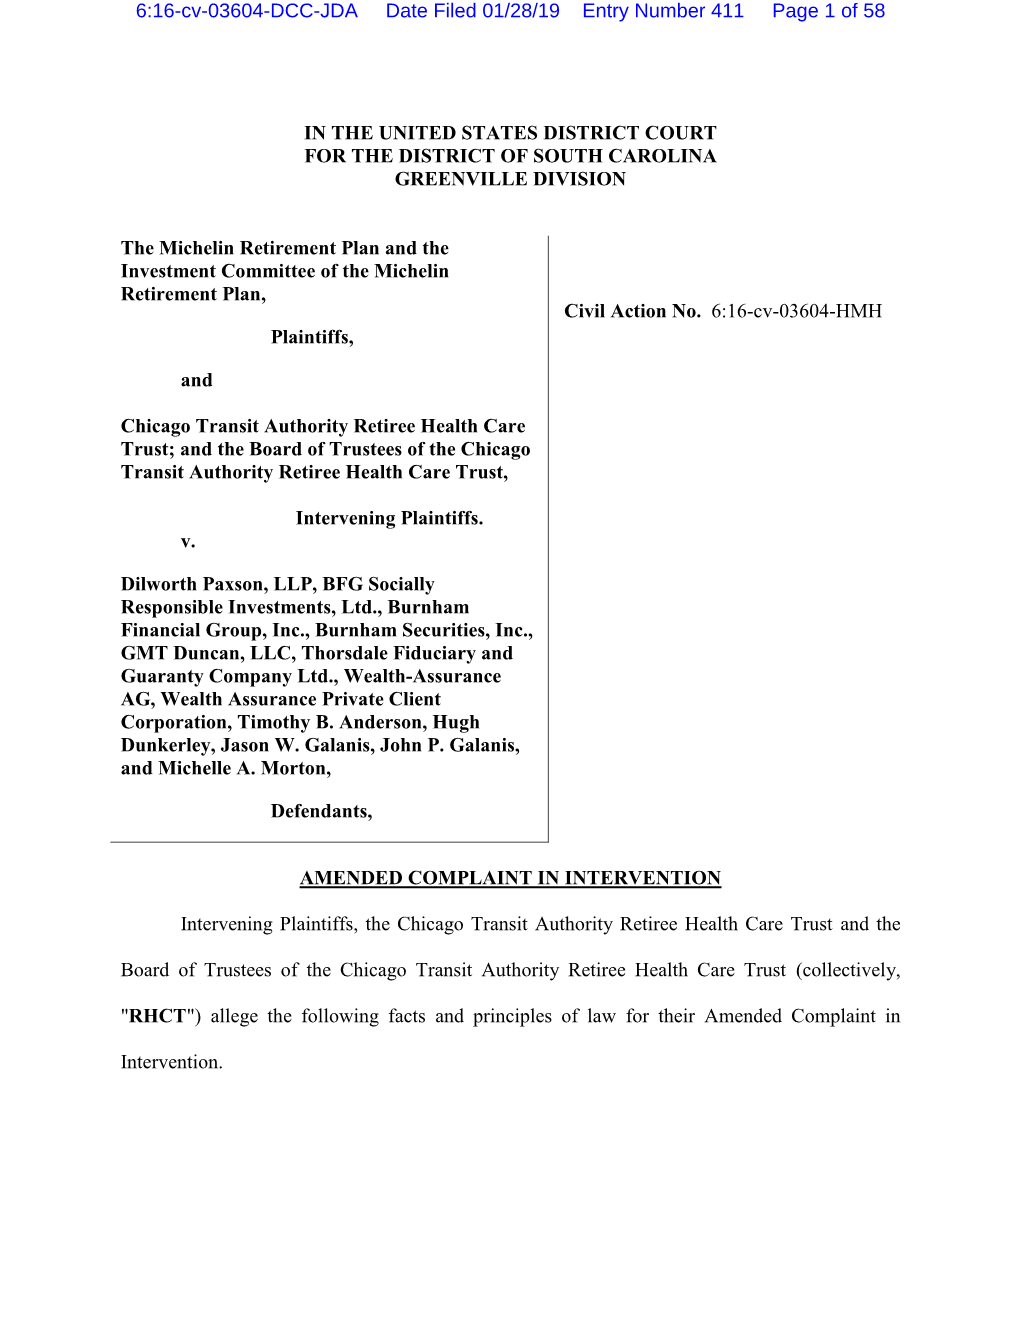 411 Amended Complaint